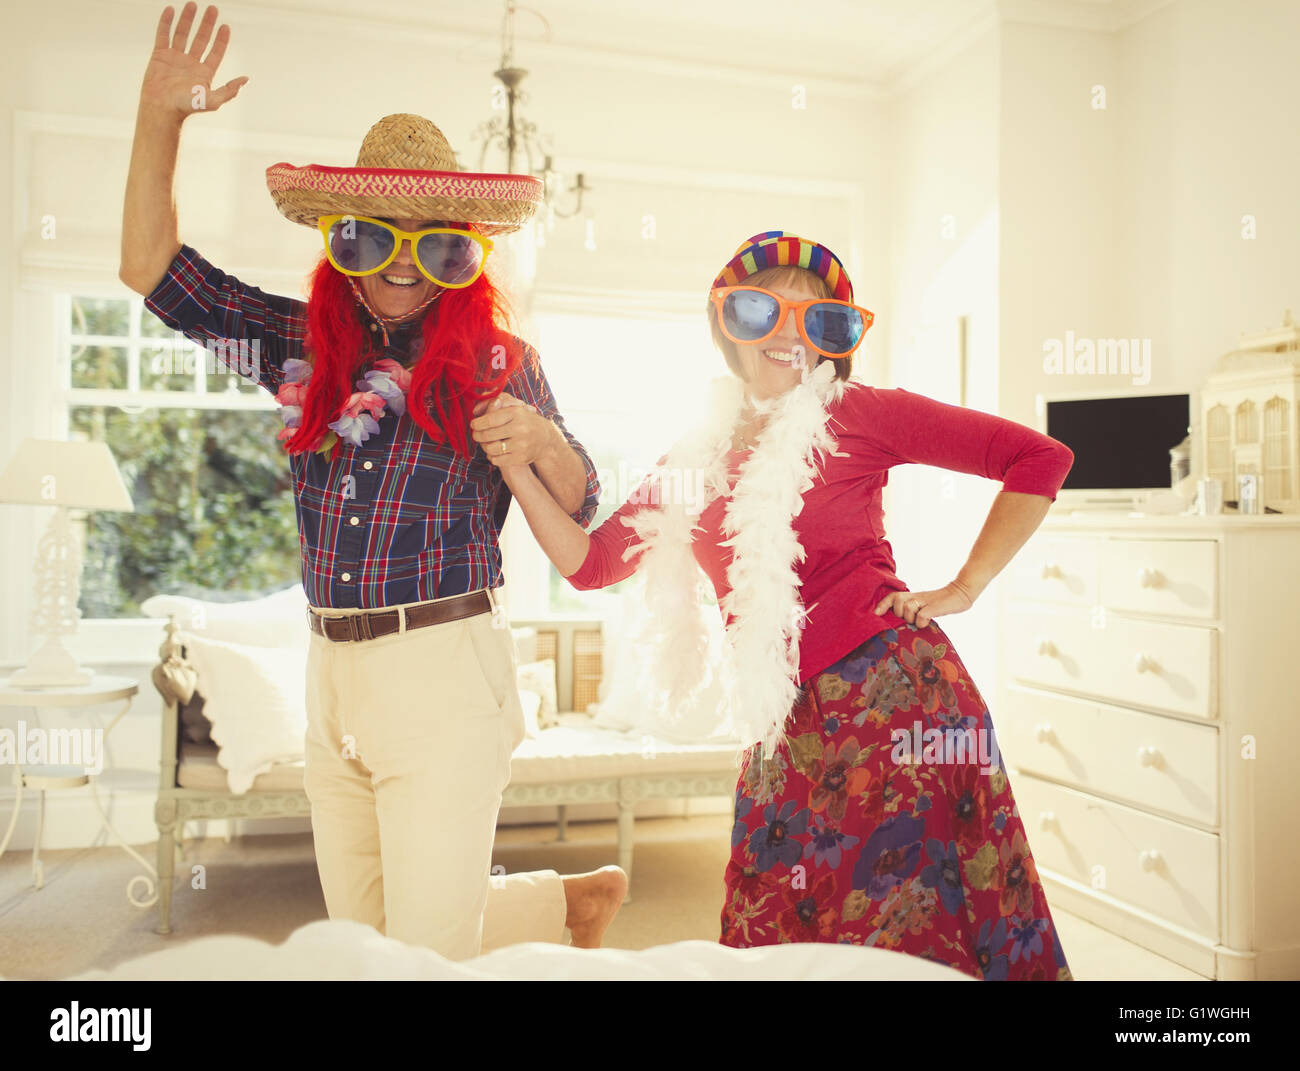 Portrait silly mature couple dancing in costumes Banque D'Images